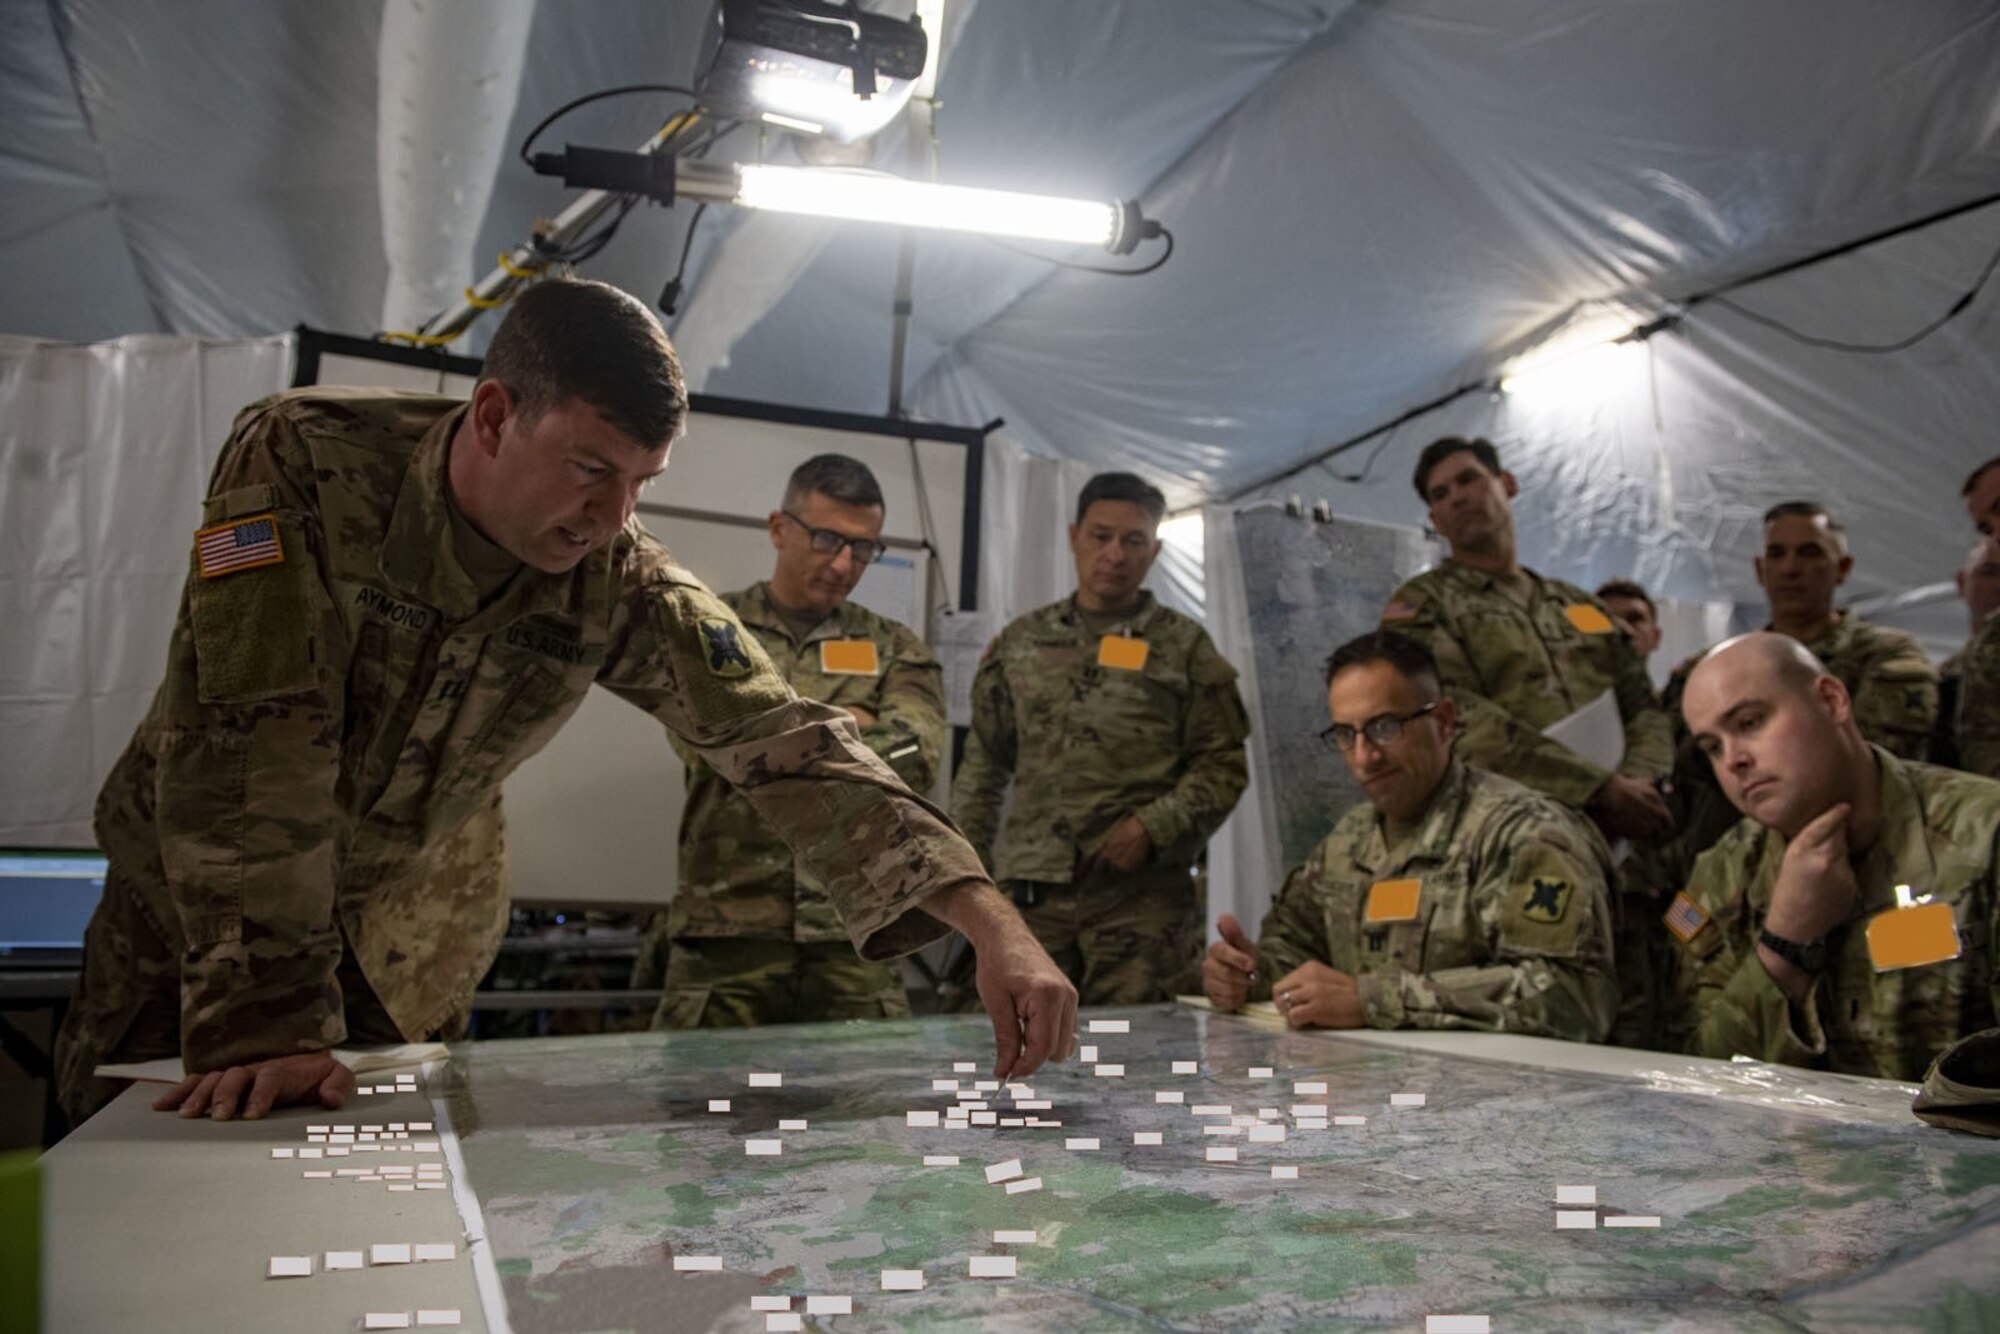 seven military members sitting and standing reviewing unit movements on table chart in a tent